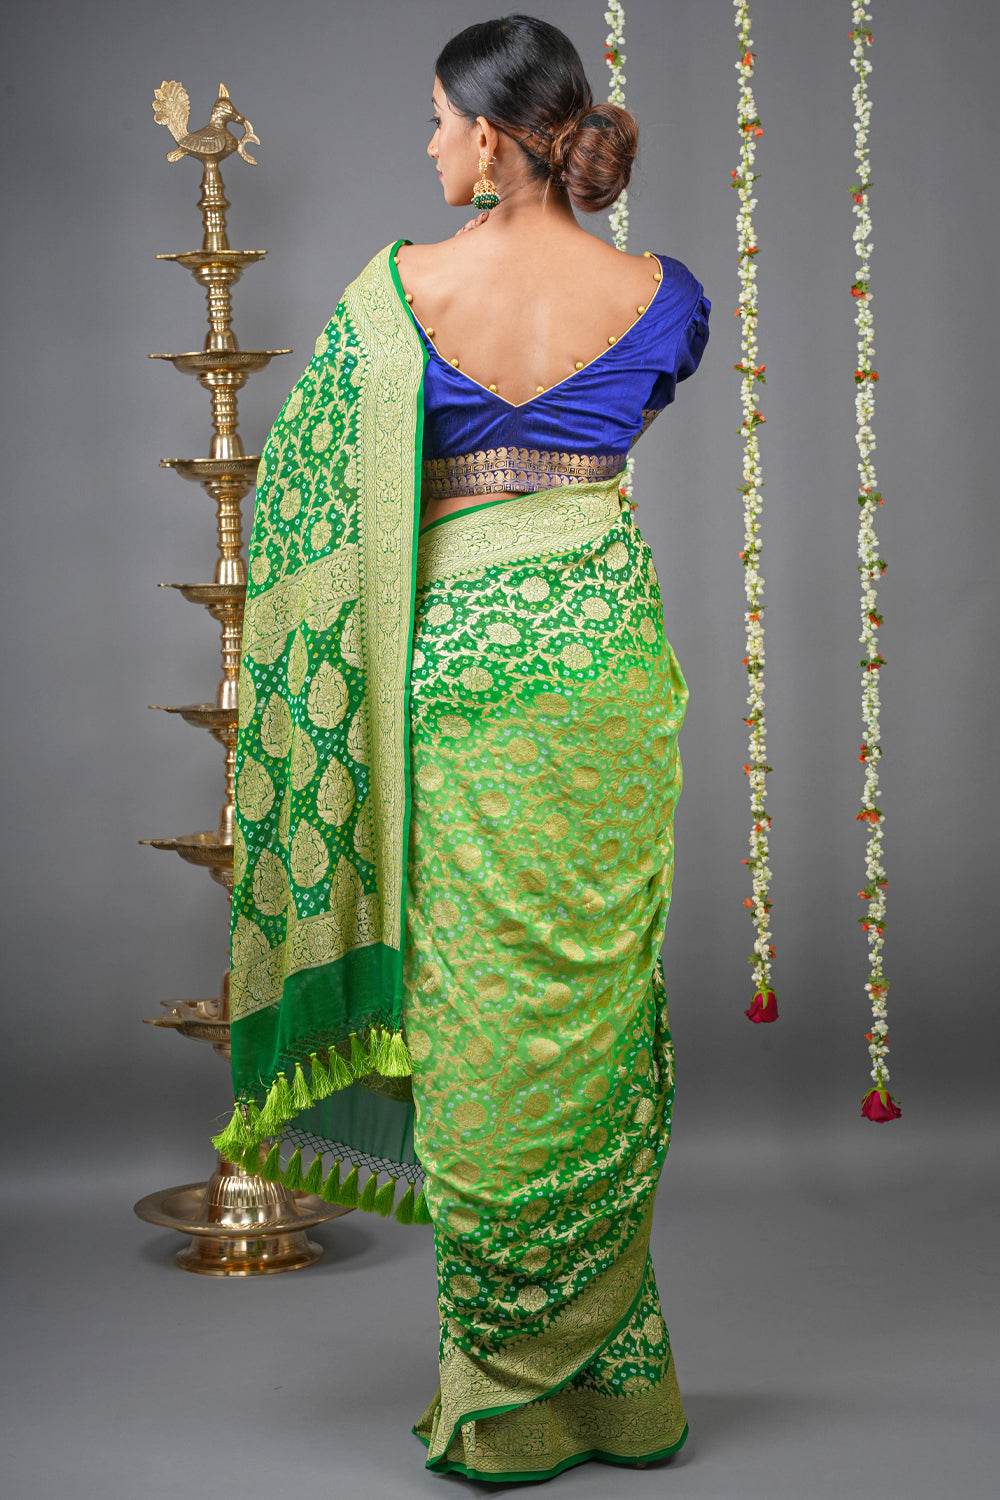 Authentic Hand Bandhej Banarasi Silk Georgette Saree in Ombre shades of Green | SILK MARK CERTIFIED